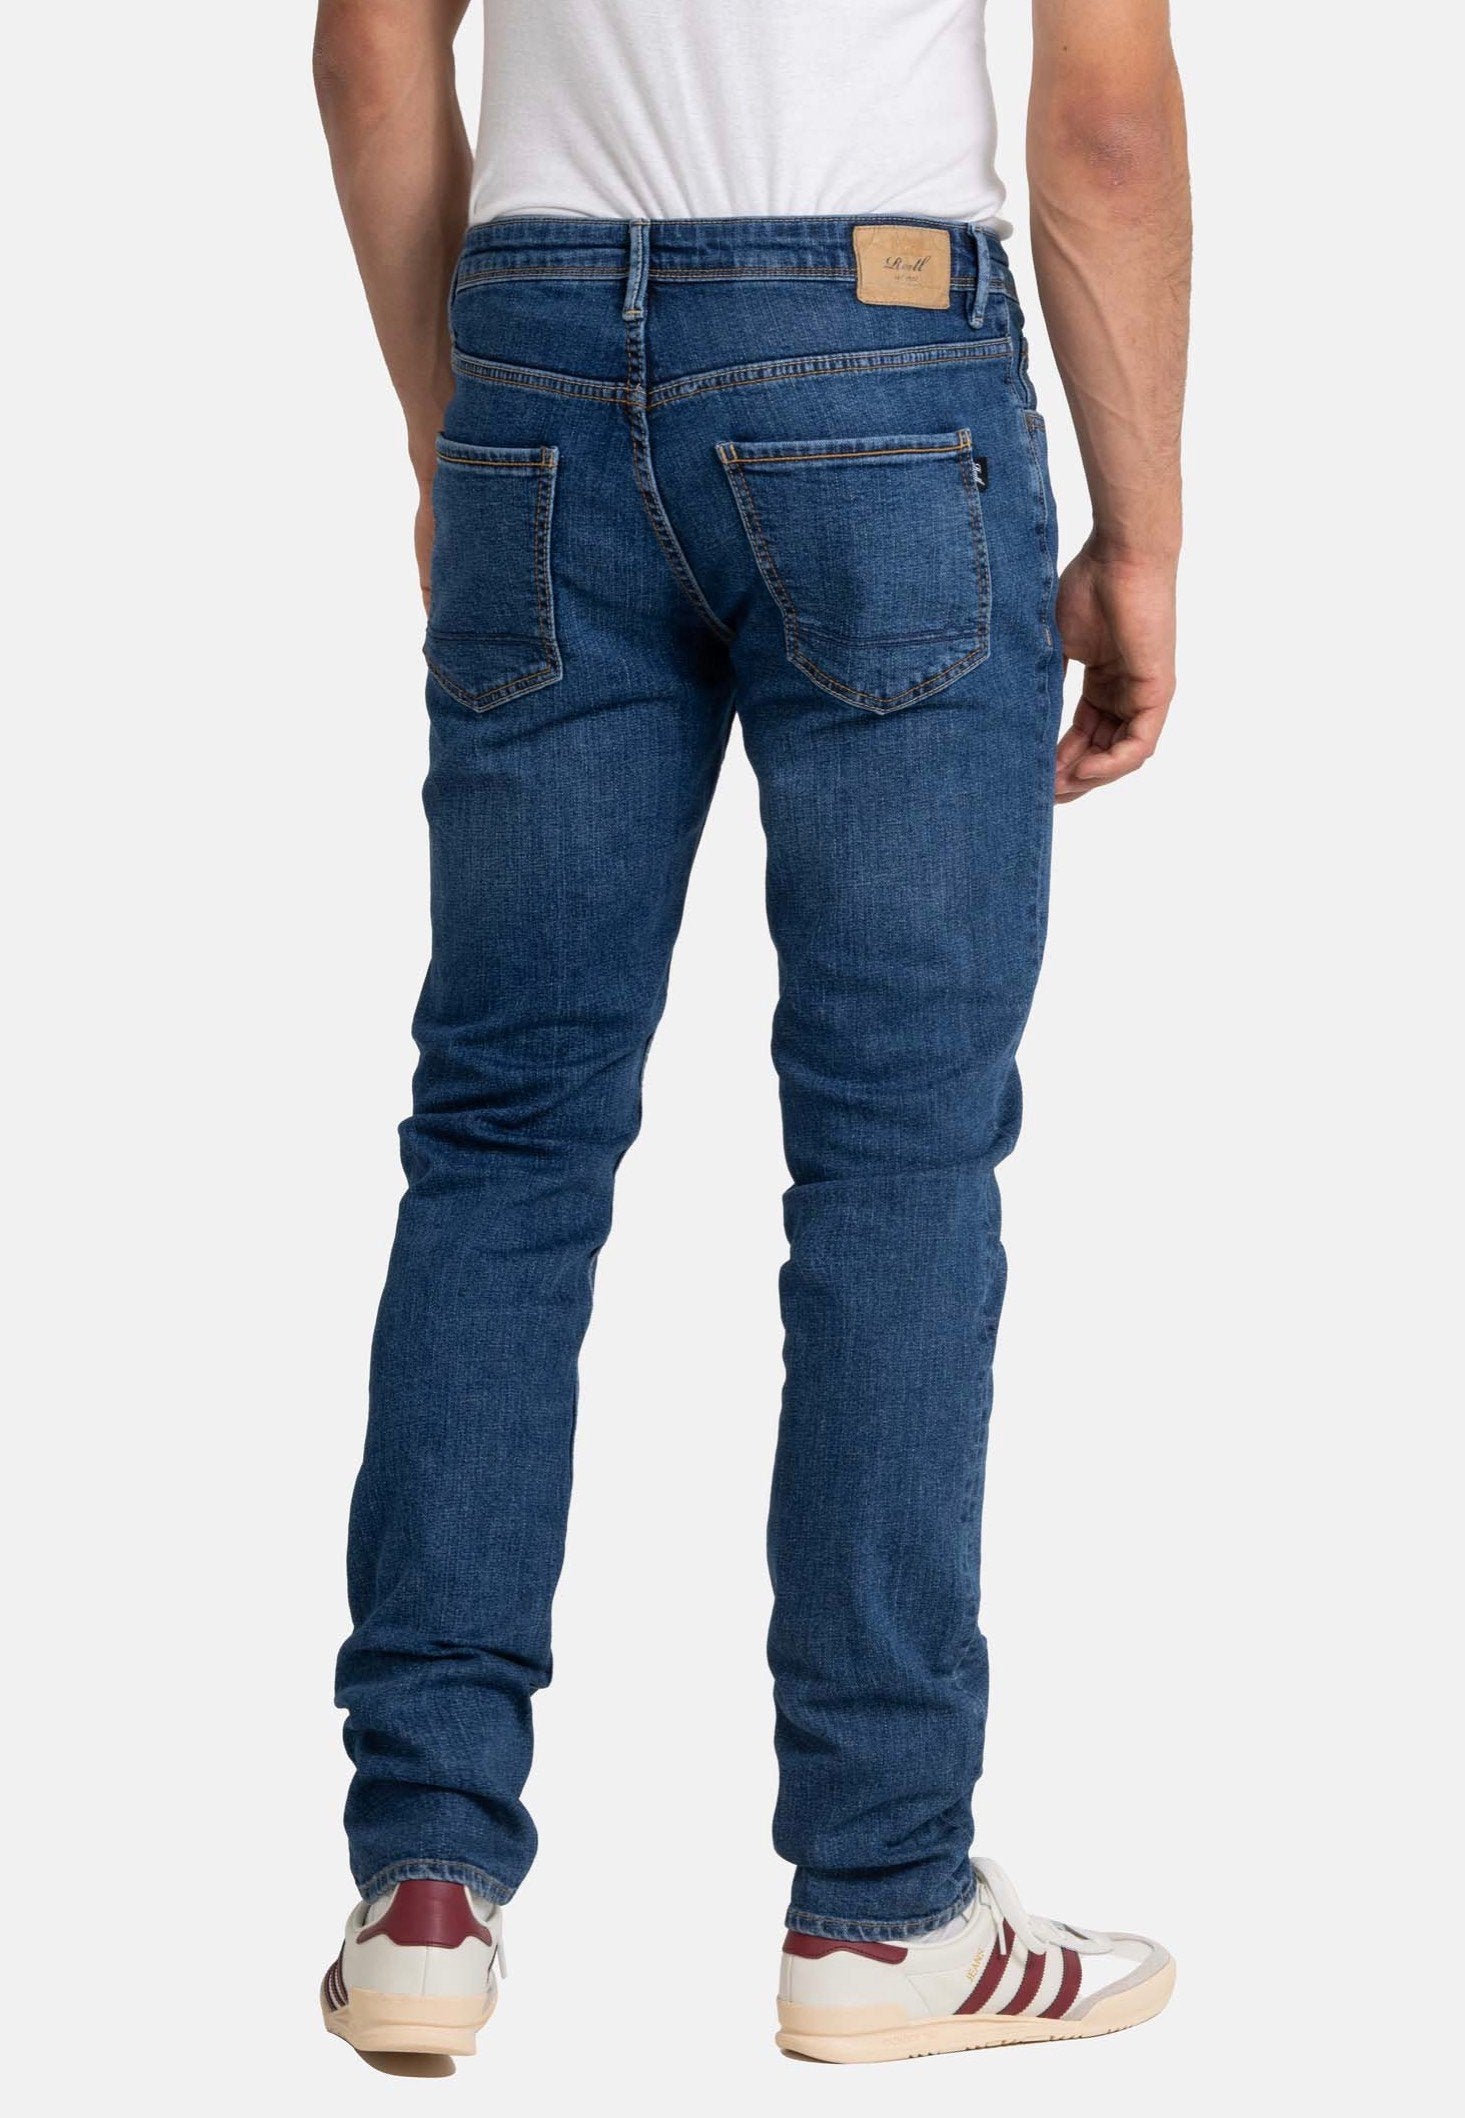 REELL - Spider Mid Blue Wash - Jeans